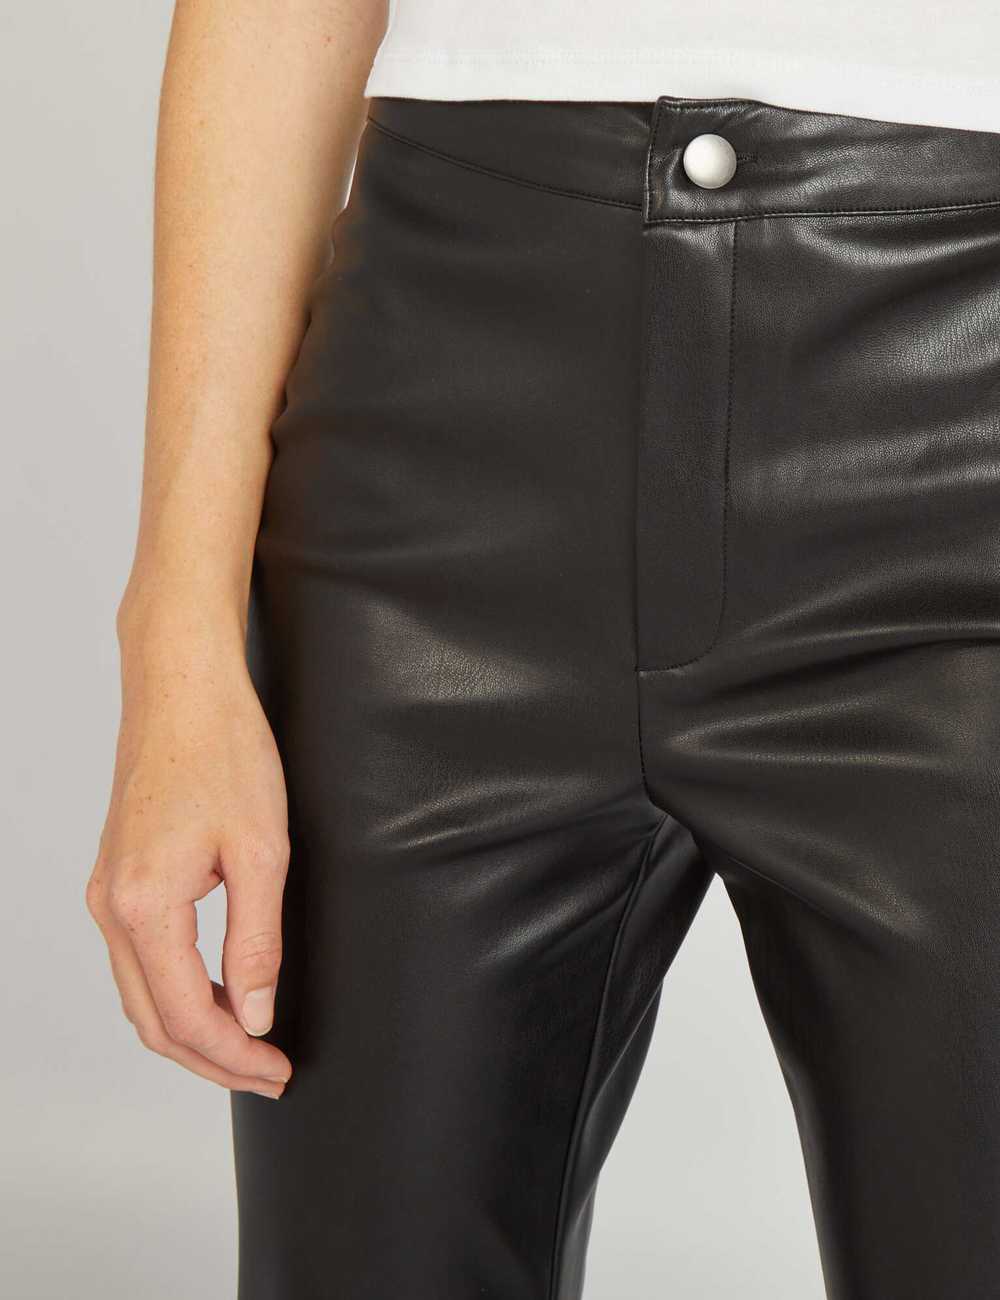 Buy Flared faux leather trousers Online in Dubai & the UAE